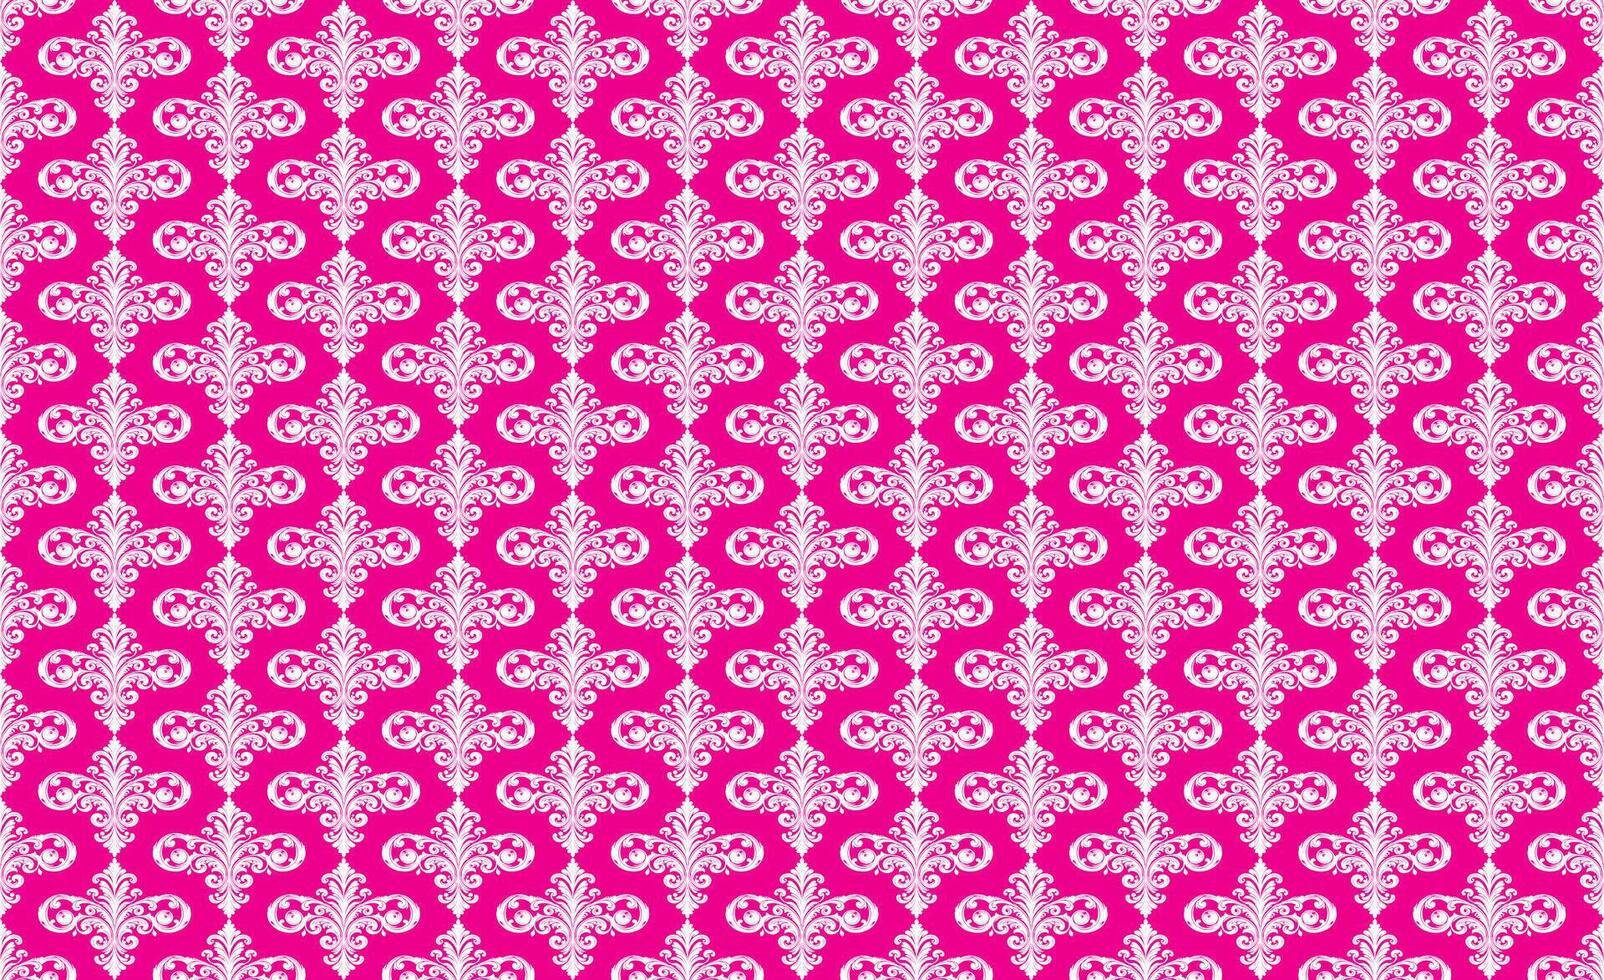 Damask Fabric textile seamless pattern pink backgground Luxury decorative Ornamental floral vintage style. Curtain, carpet, wallpaper, clothing, wrapping, textile vector